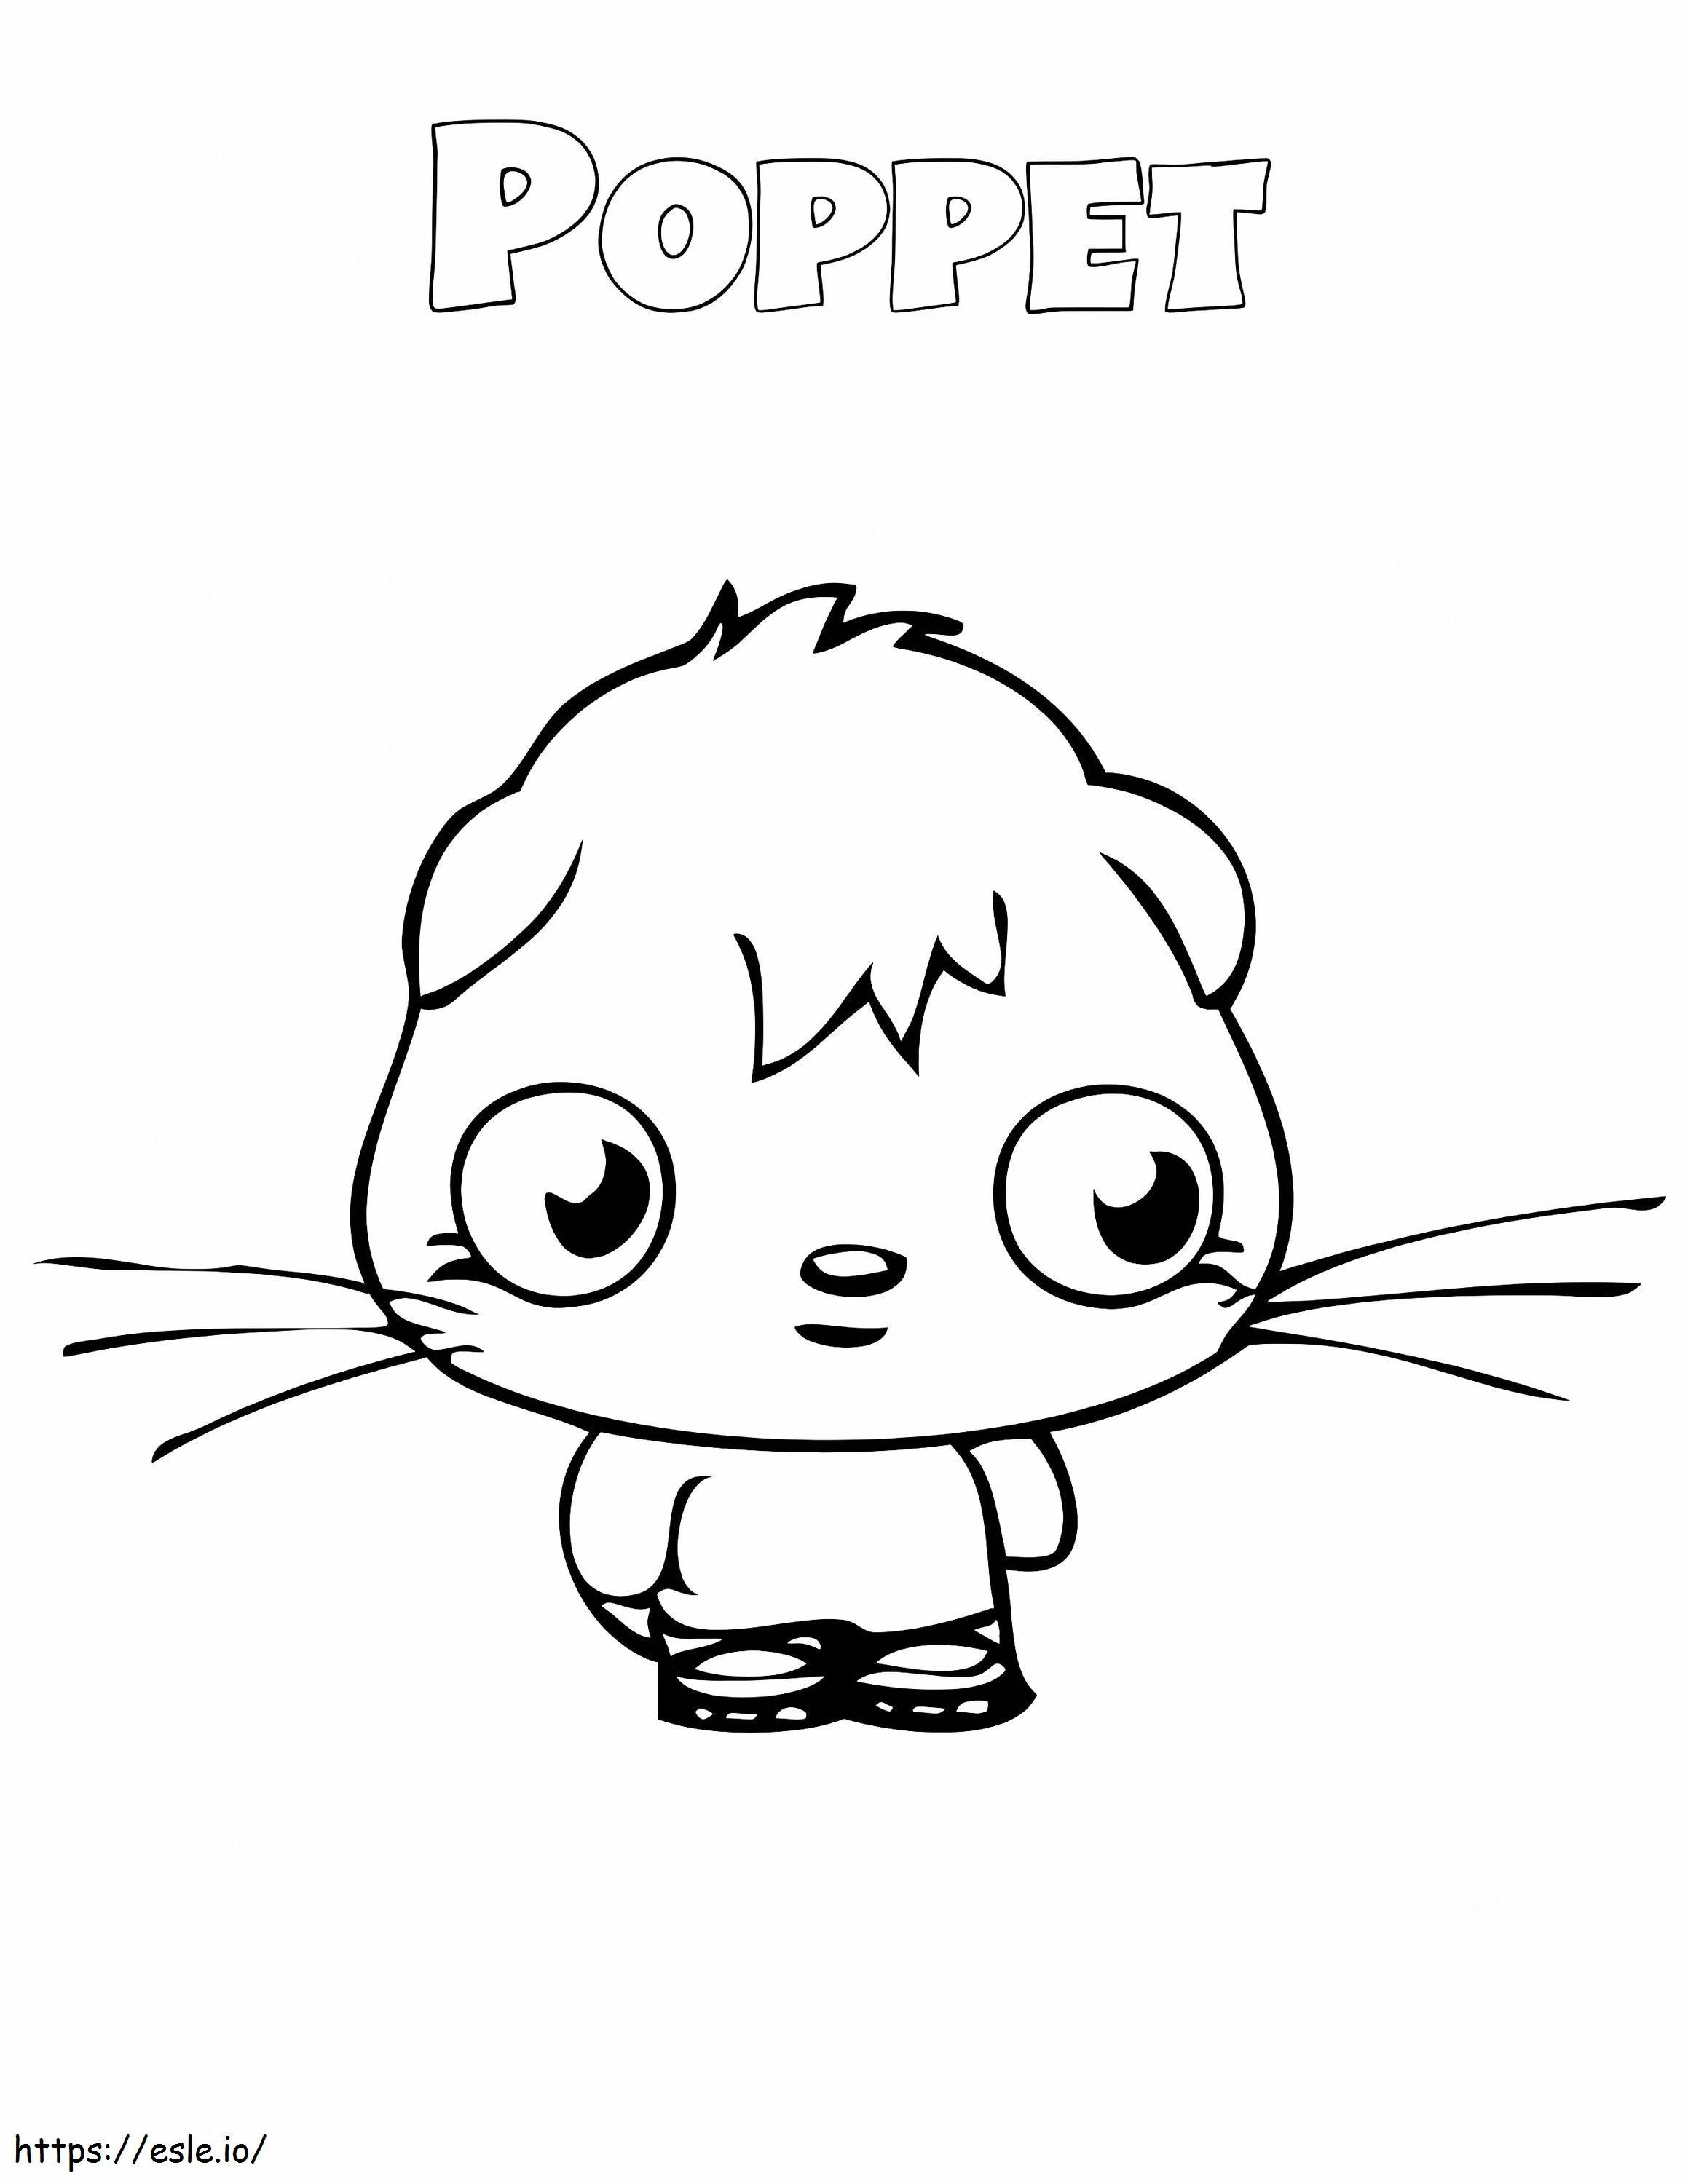 Poppet Moshi Monster coloring page